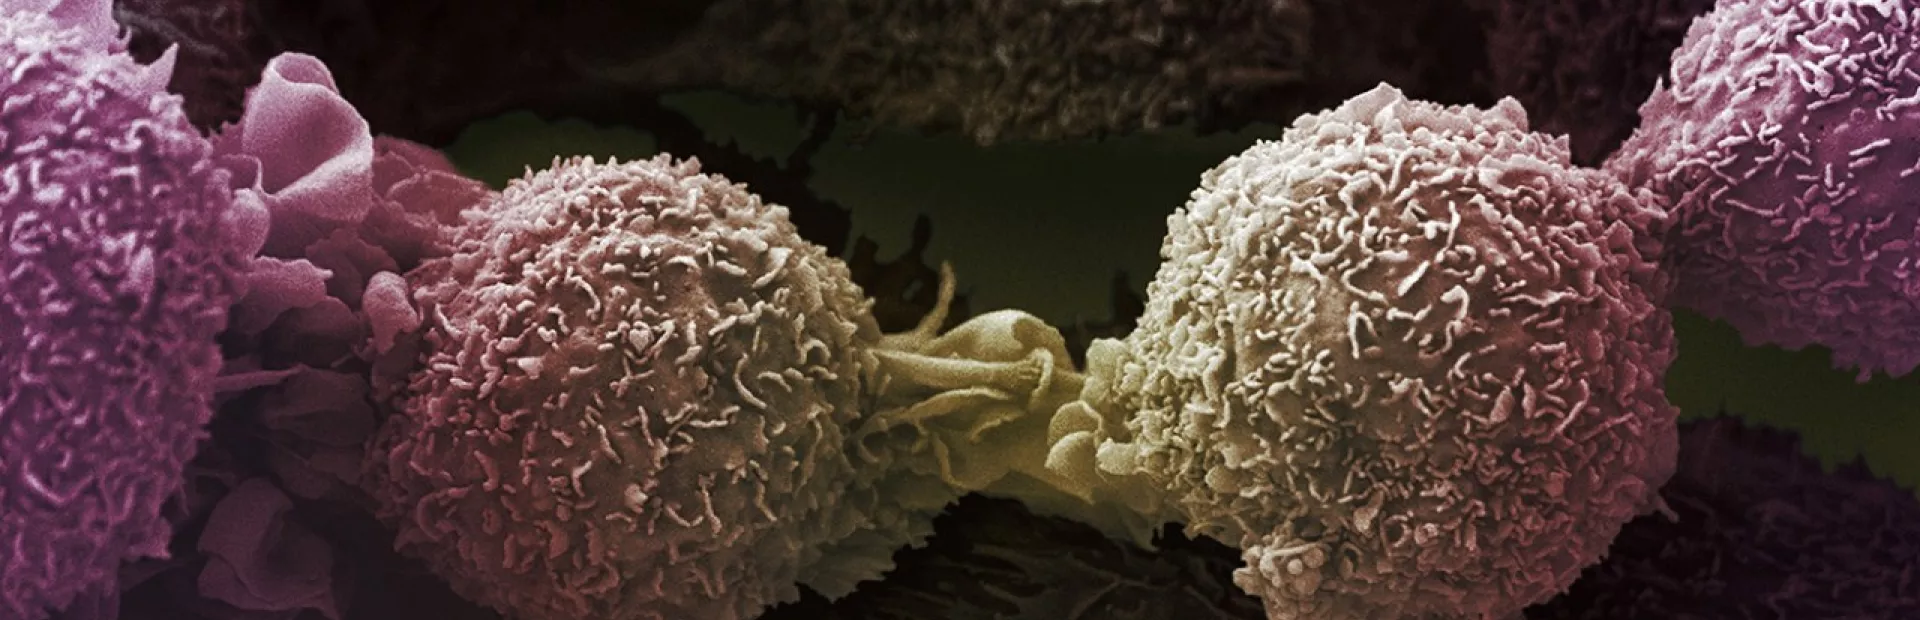 Lung cancer cells by Ann Weston, LRI, CRUK, Welcome Images